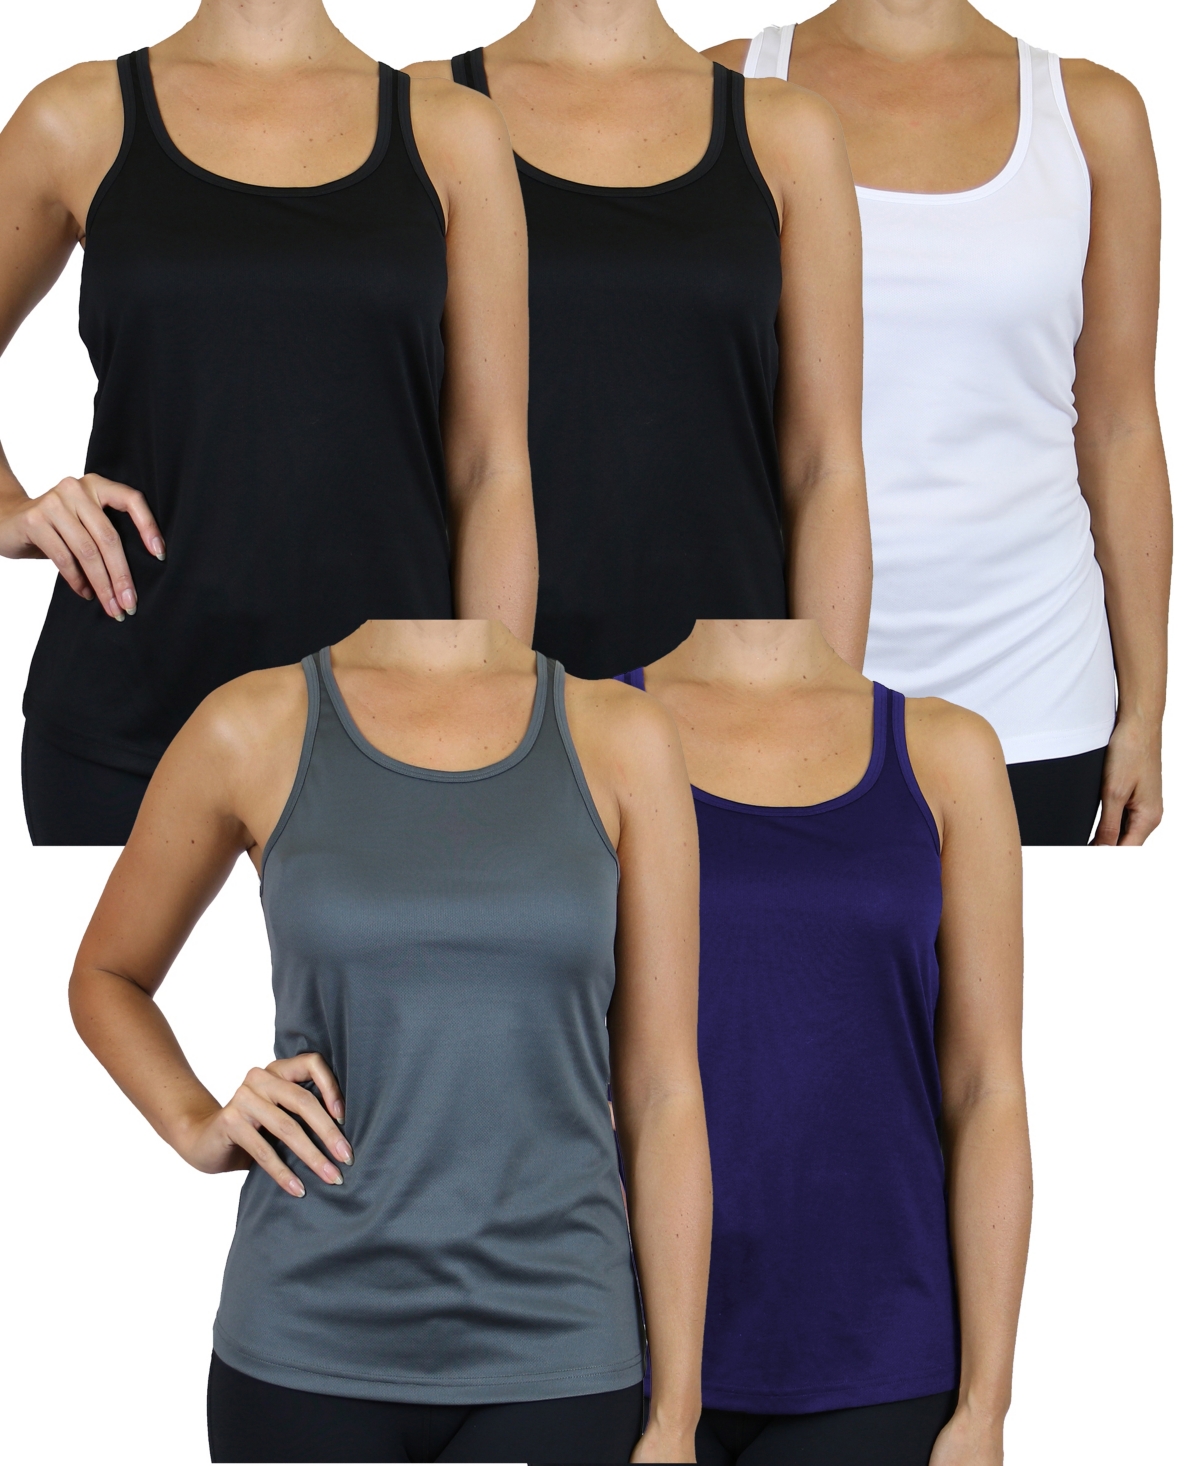 Galaxy By Harvic Women's Moisture Wicking Racerback Tanks-5 Pack In Black Multi Color